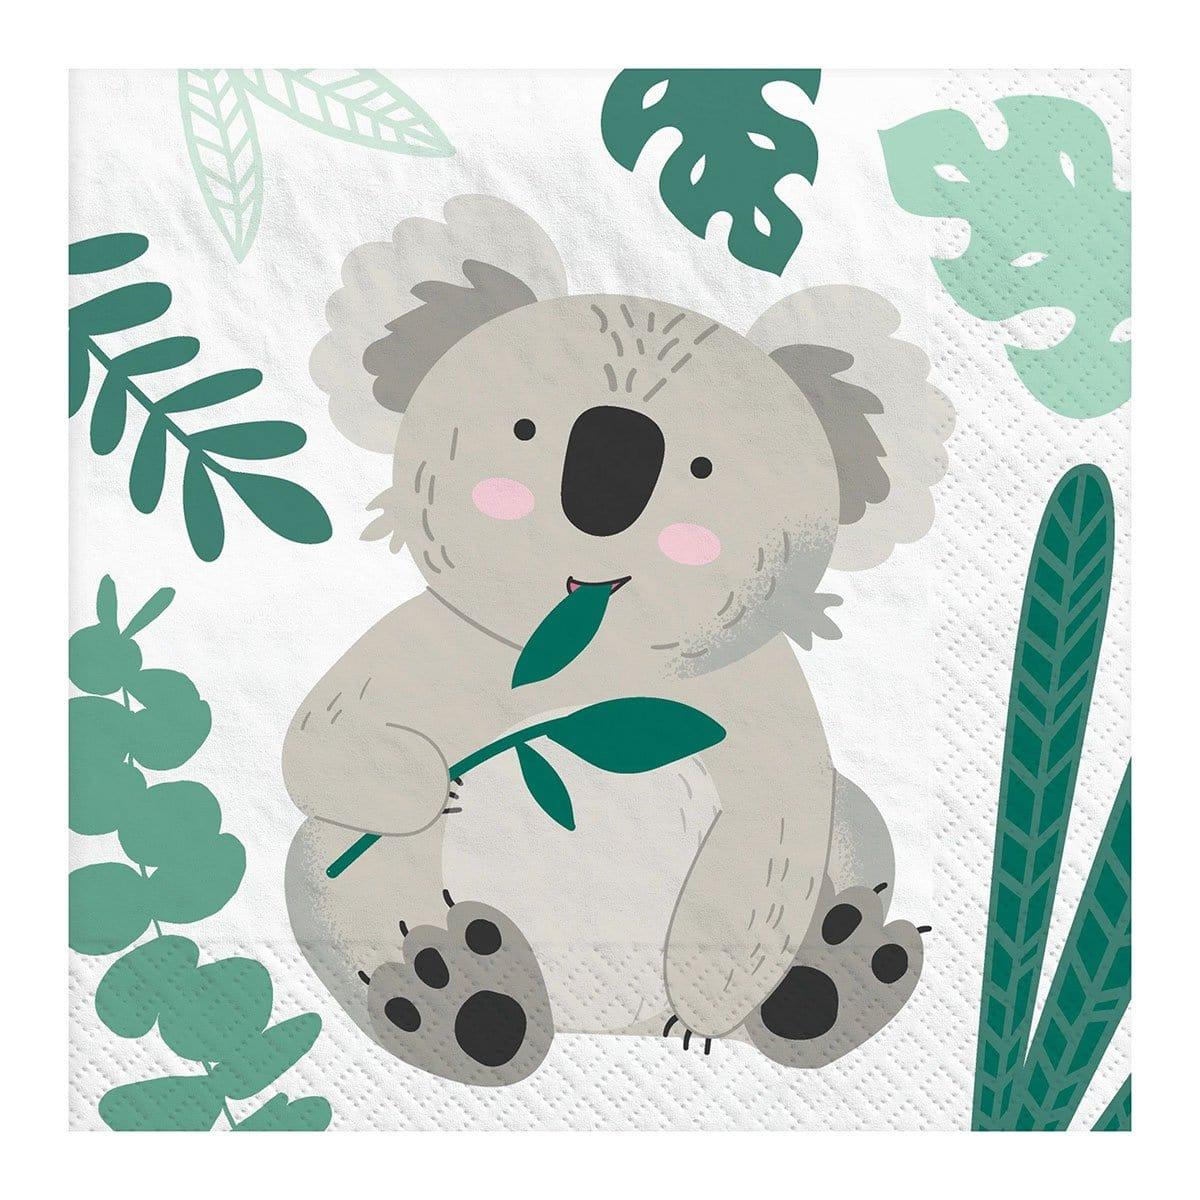 Buy Kids Birthday Koala Party Beverage Napkins, 16 Count sold at Party Expert